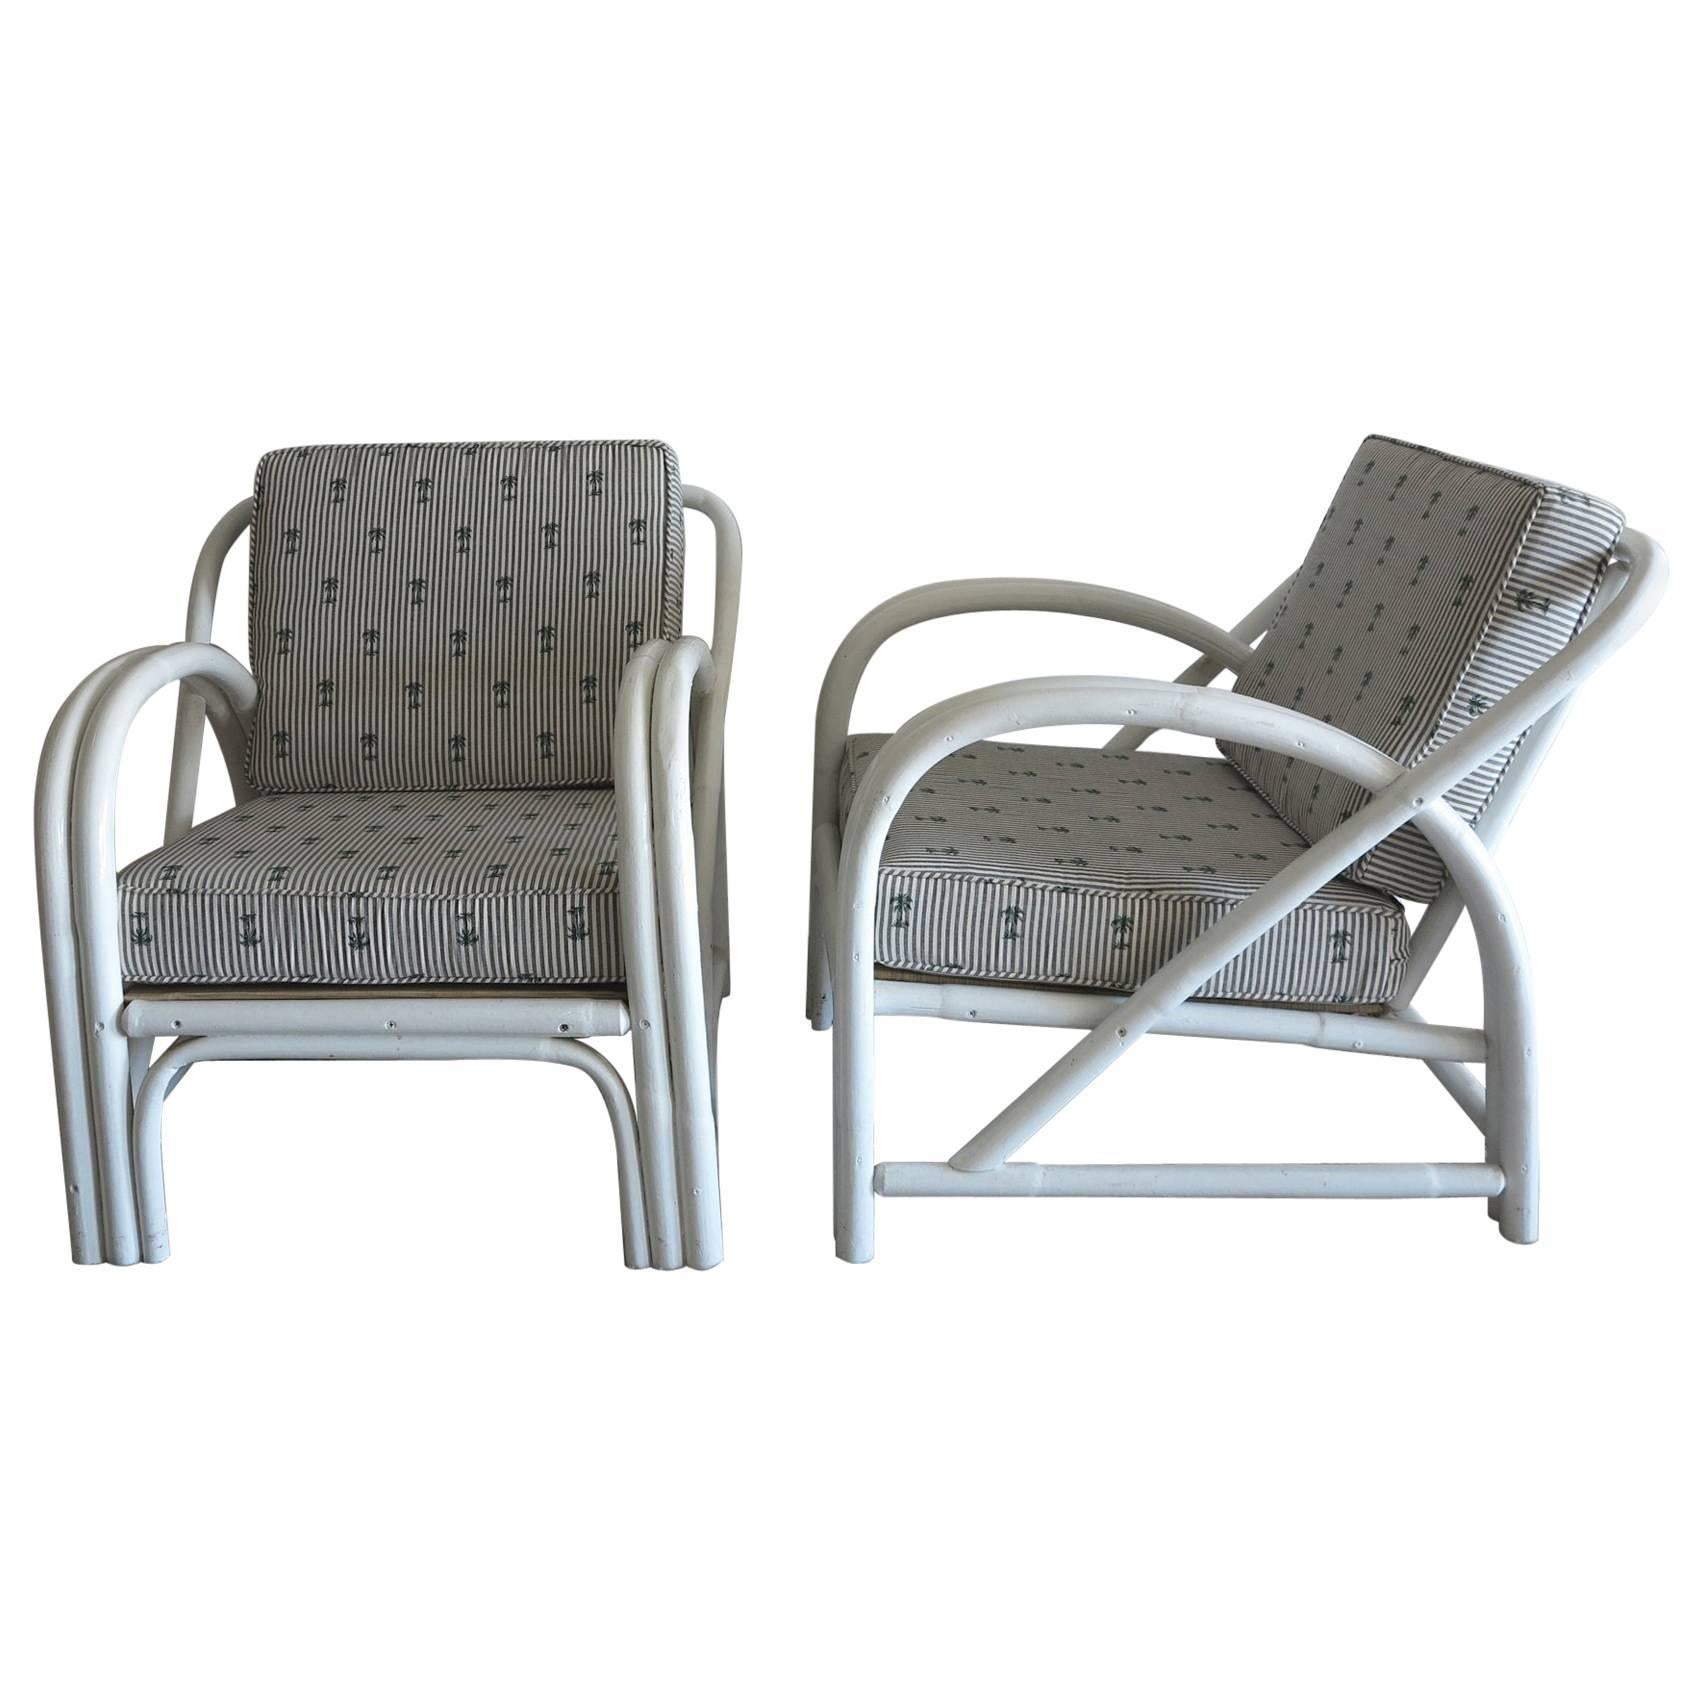 Vintage Rattan Lounge Chairs Painted White